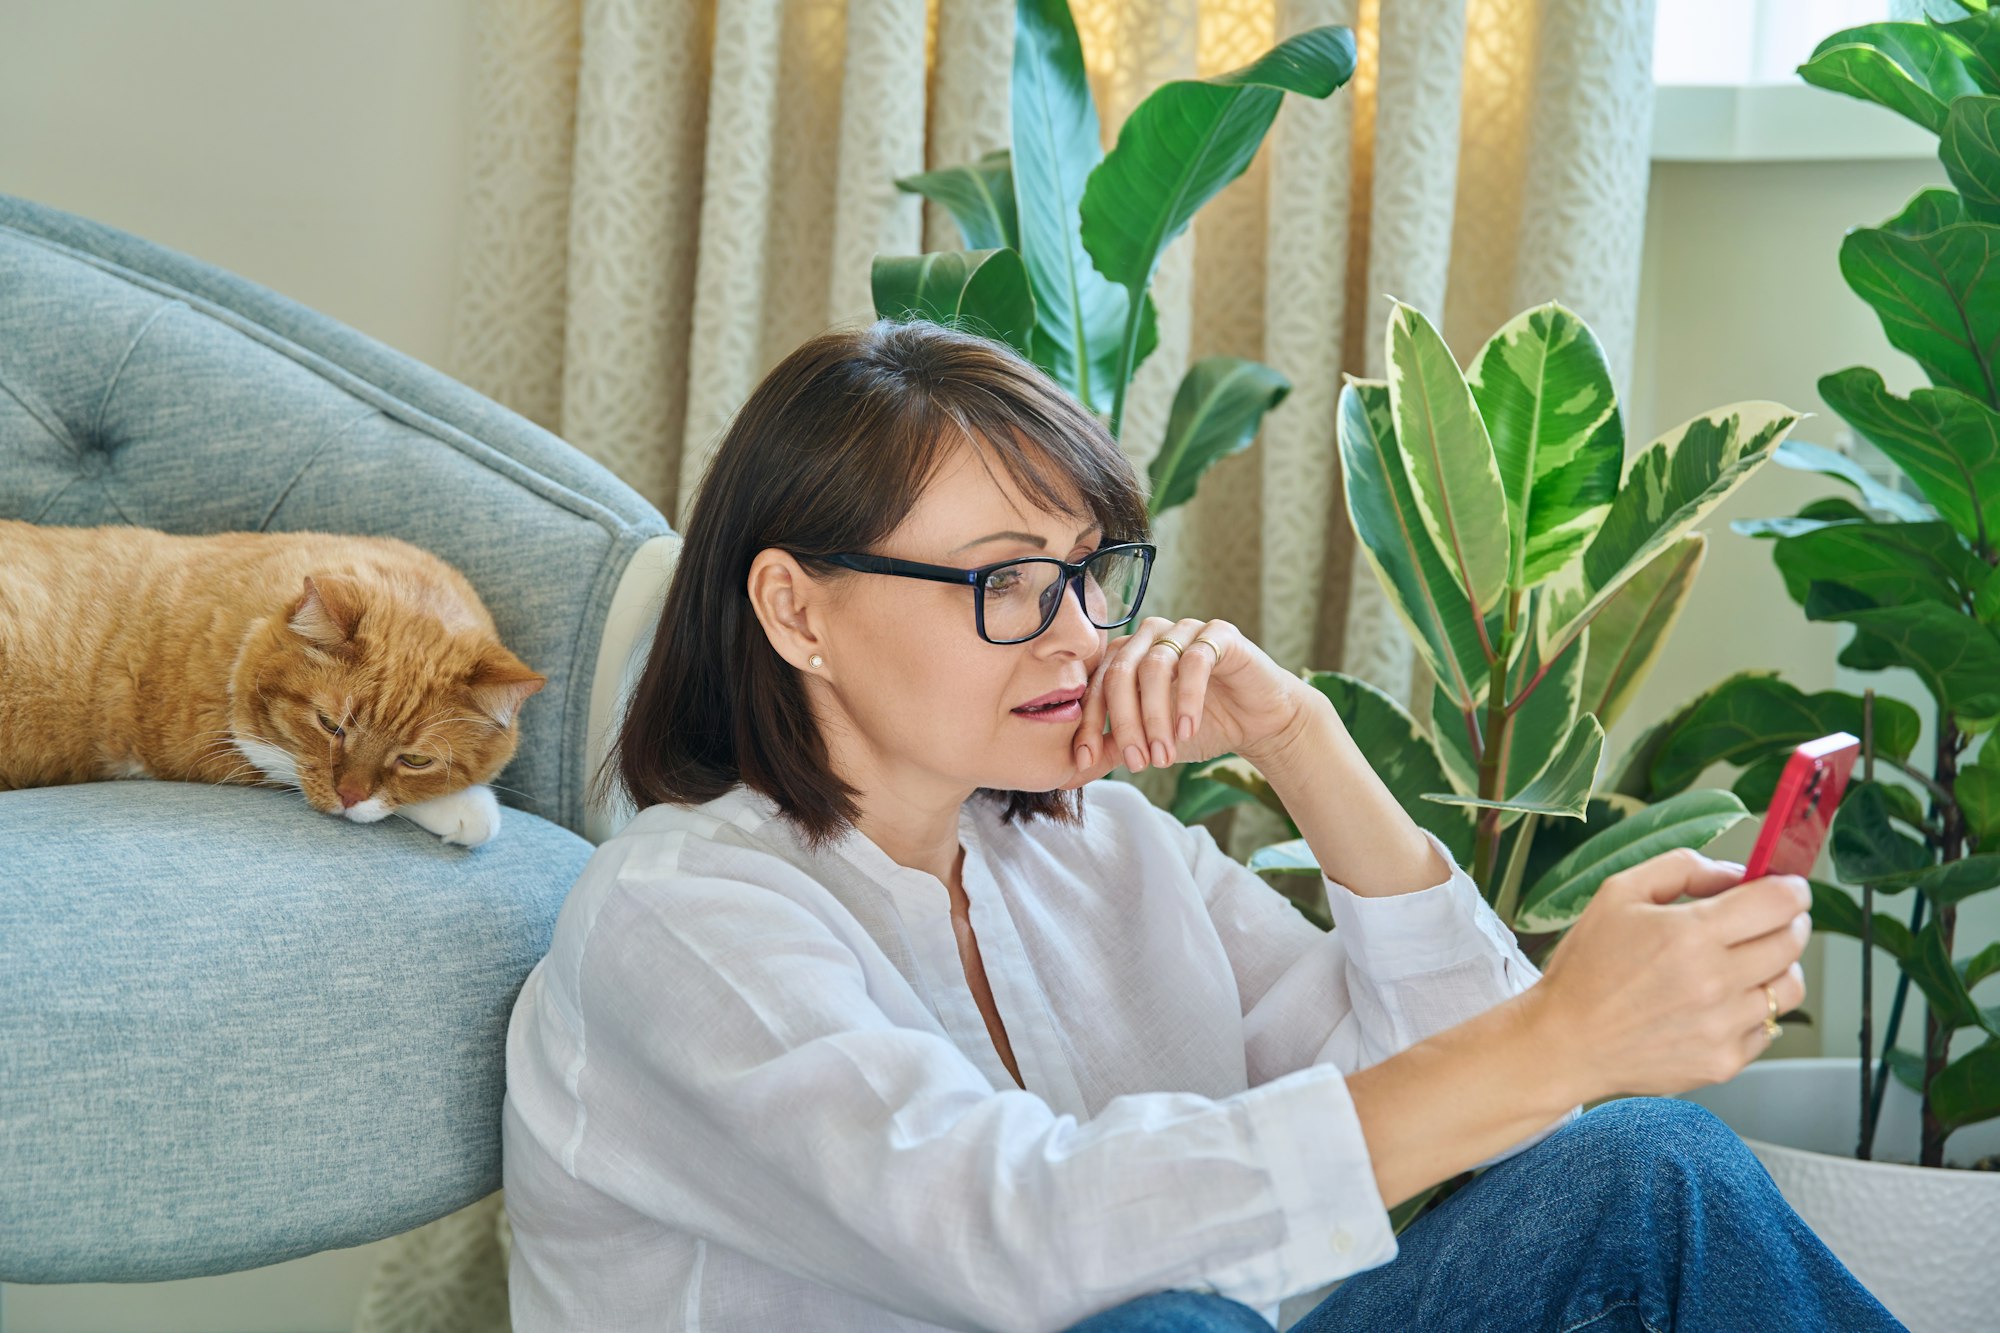 Mature woman sitting at home, using smartphone